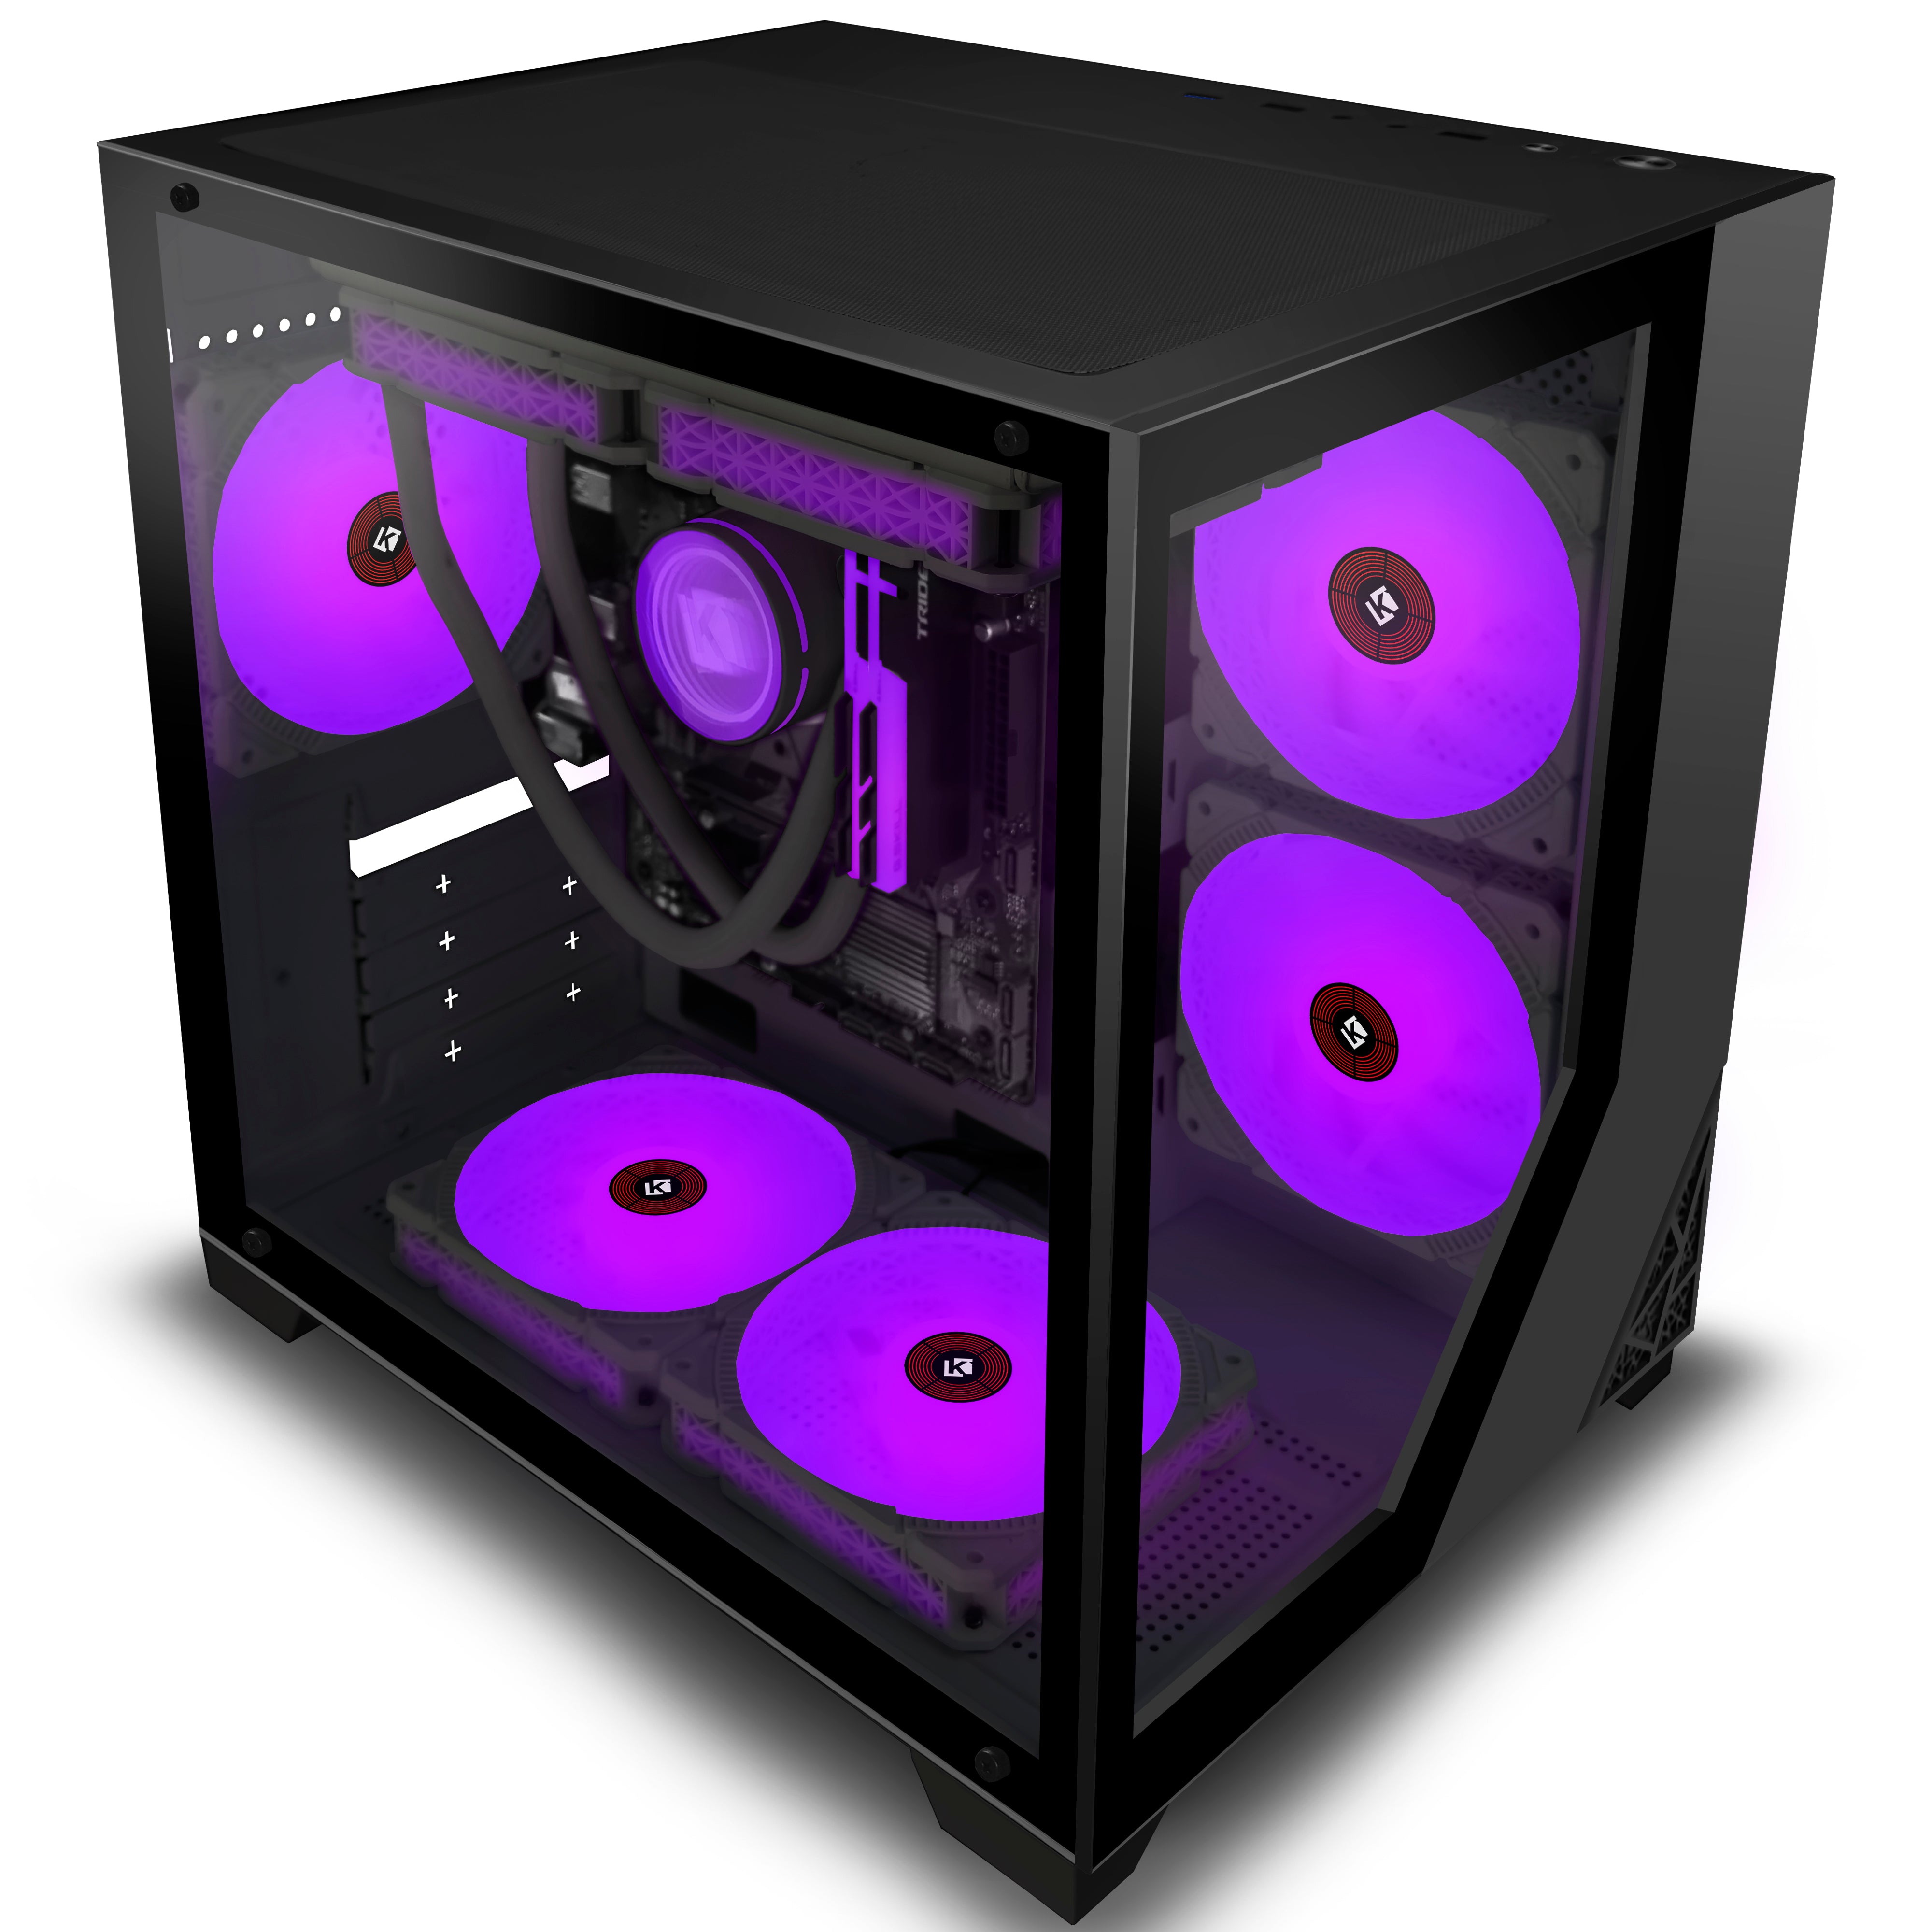 KEDIERS Innovative PC Case - ATX Tower Tempered Glass Gaming Computer Case  with 2 ARGB Light Boards